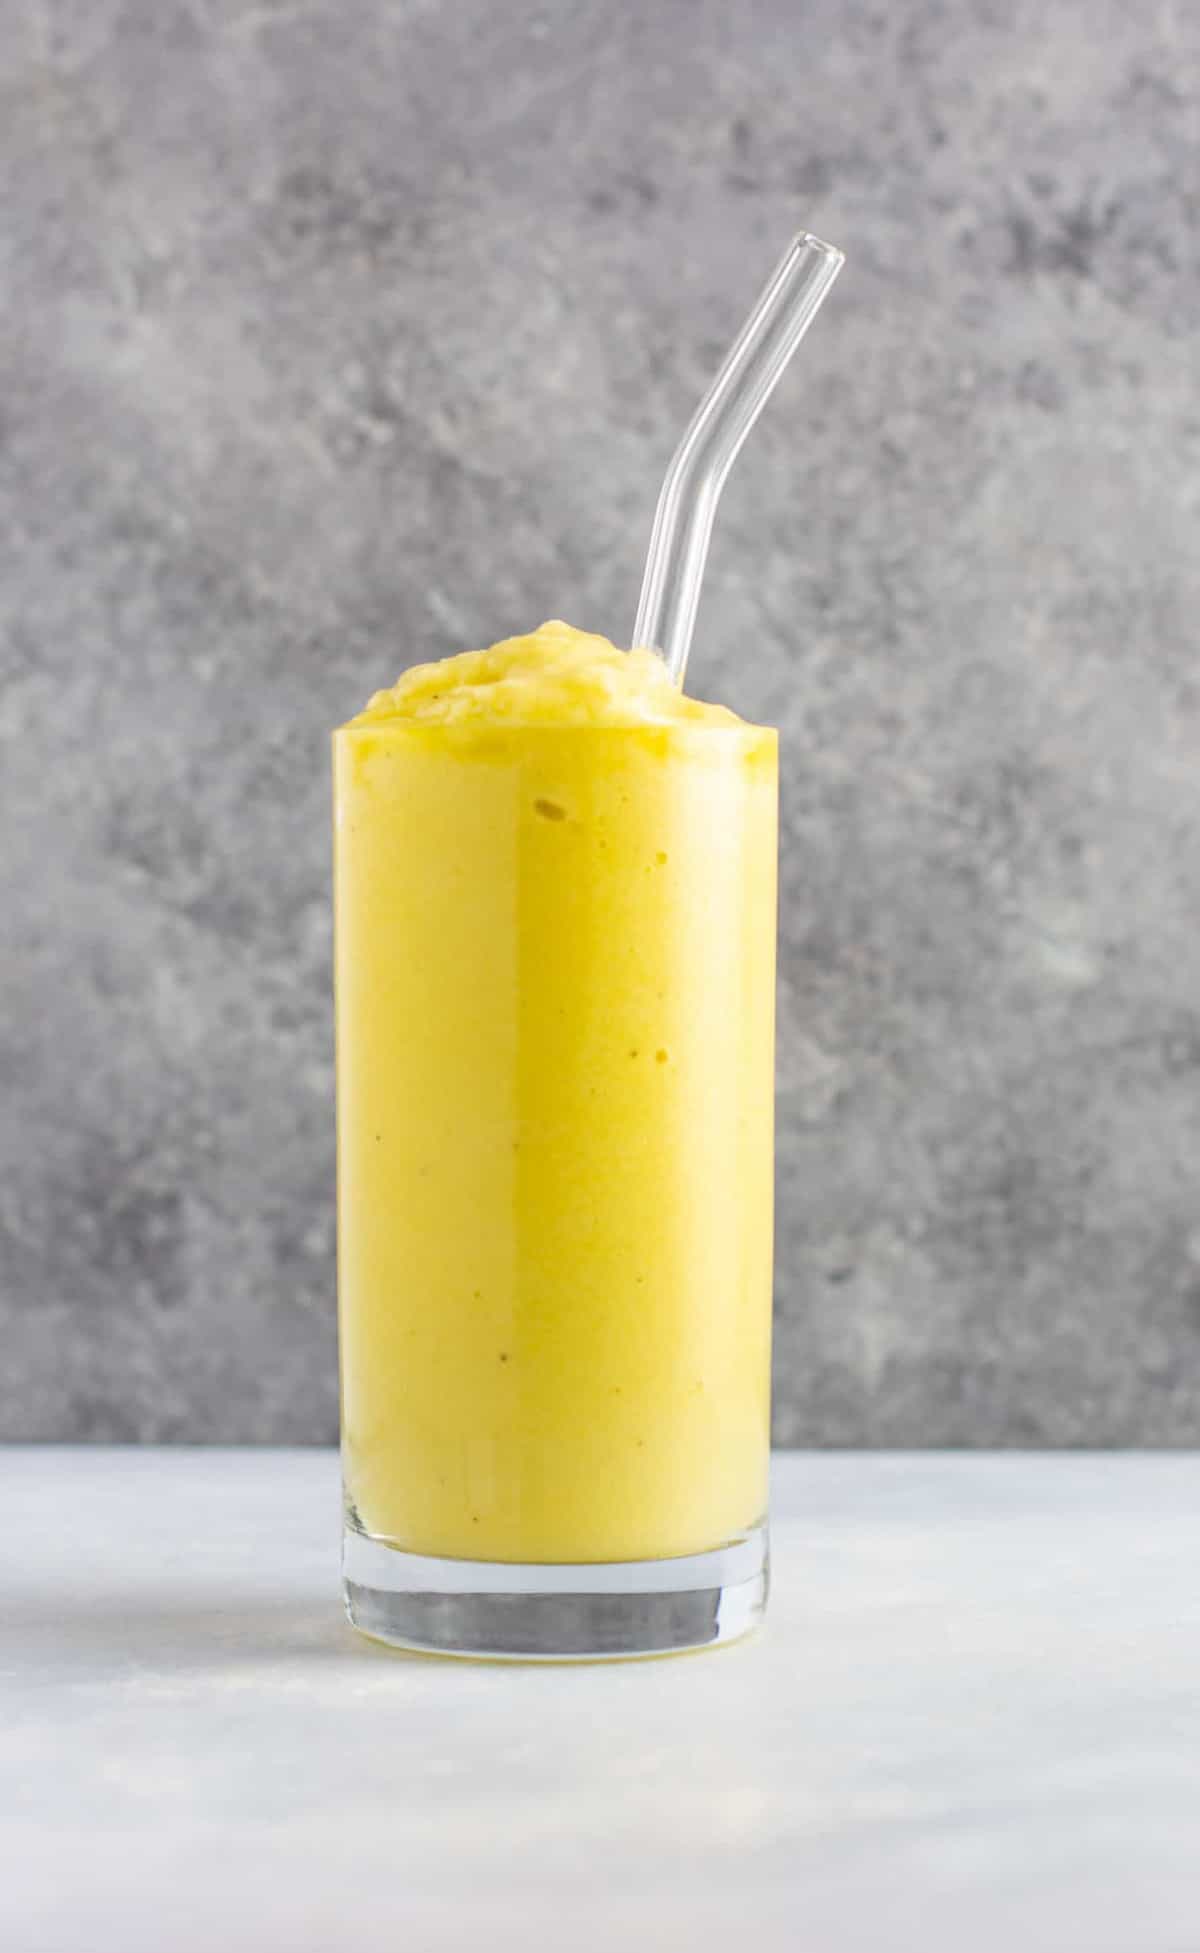 Pineapple detox smoothie with cucumbers, celery, lemon, peaches, ginger, and frozen bananas. A healthy smoothie recipe that tastes delicious! #detox #detoxsmoothie #healthysmoothie #vegan #healthyeating #healthyrecipe #smoothie #vegansmoothie 